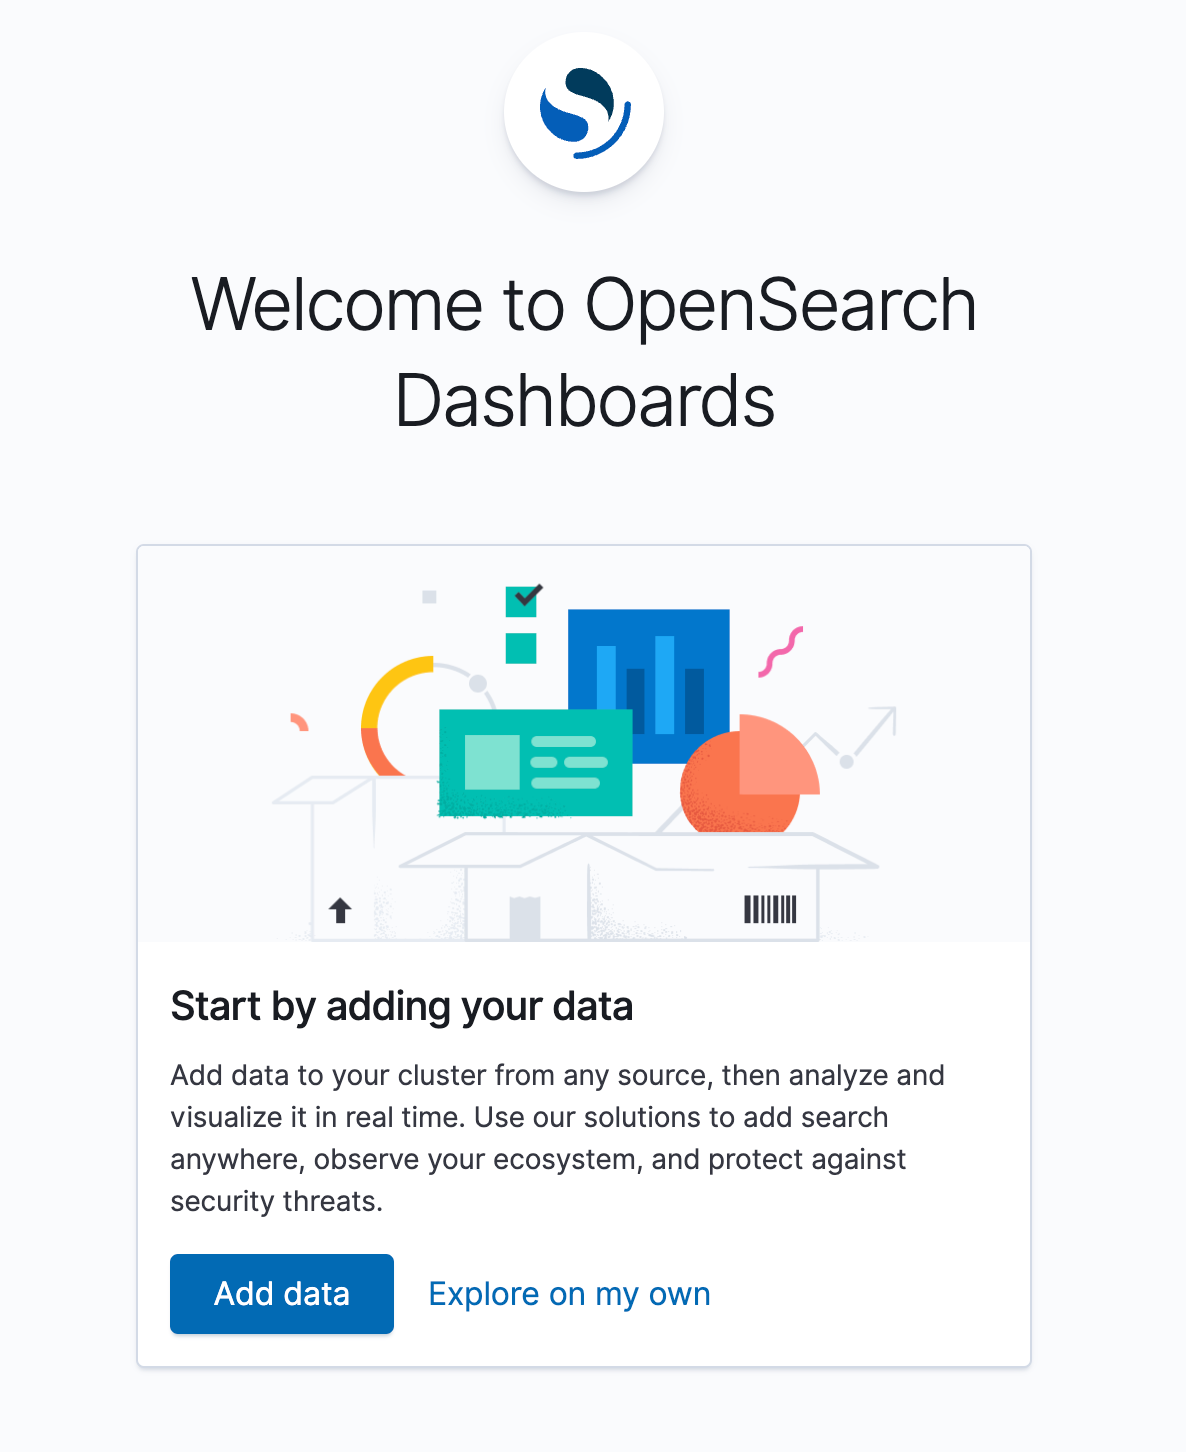 opensearch-dashboards-welcome